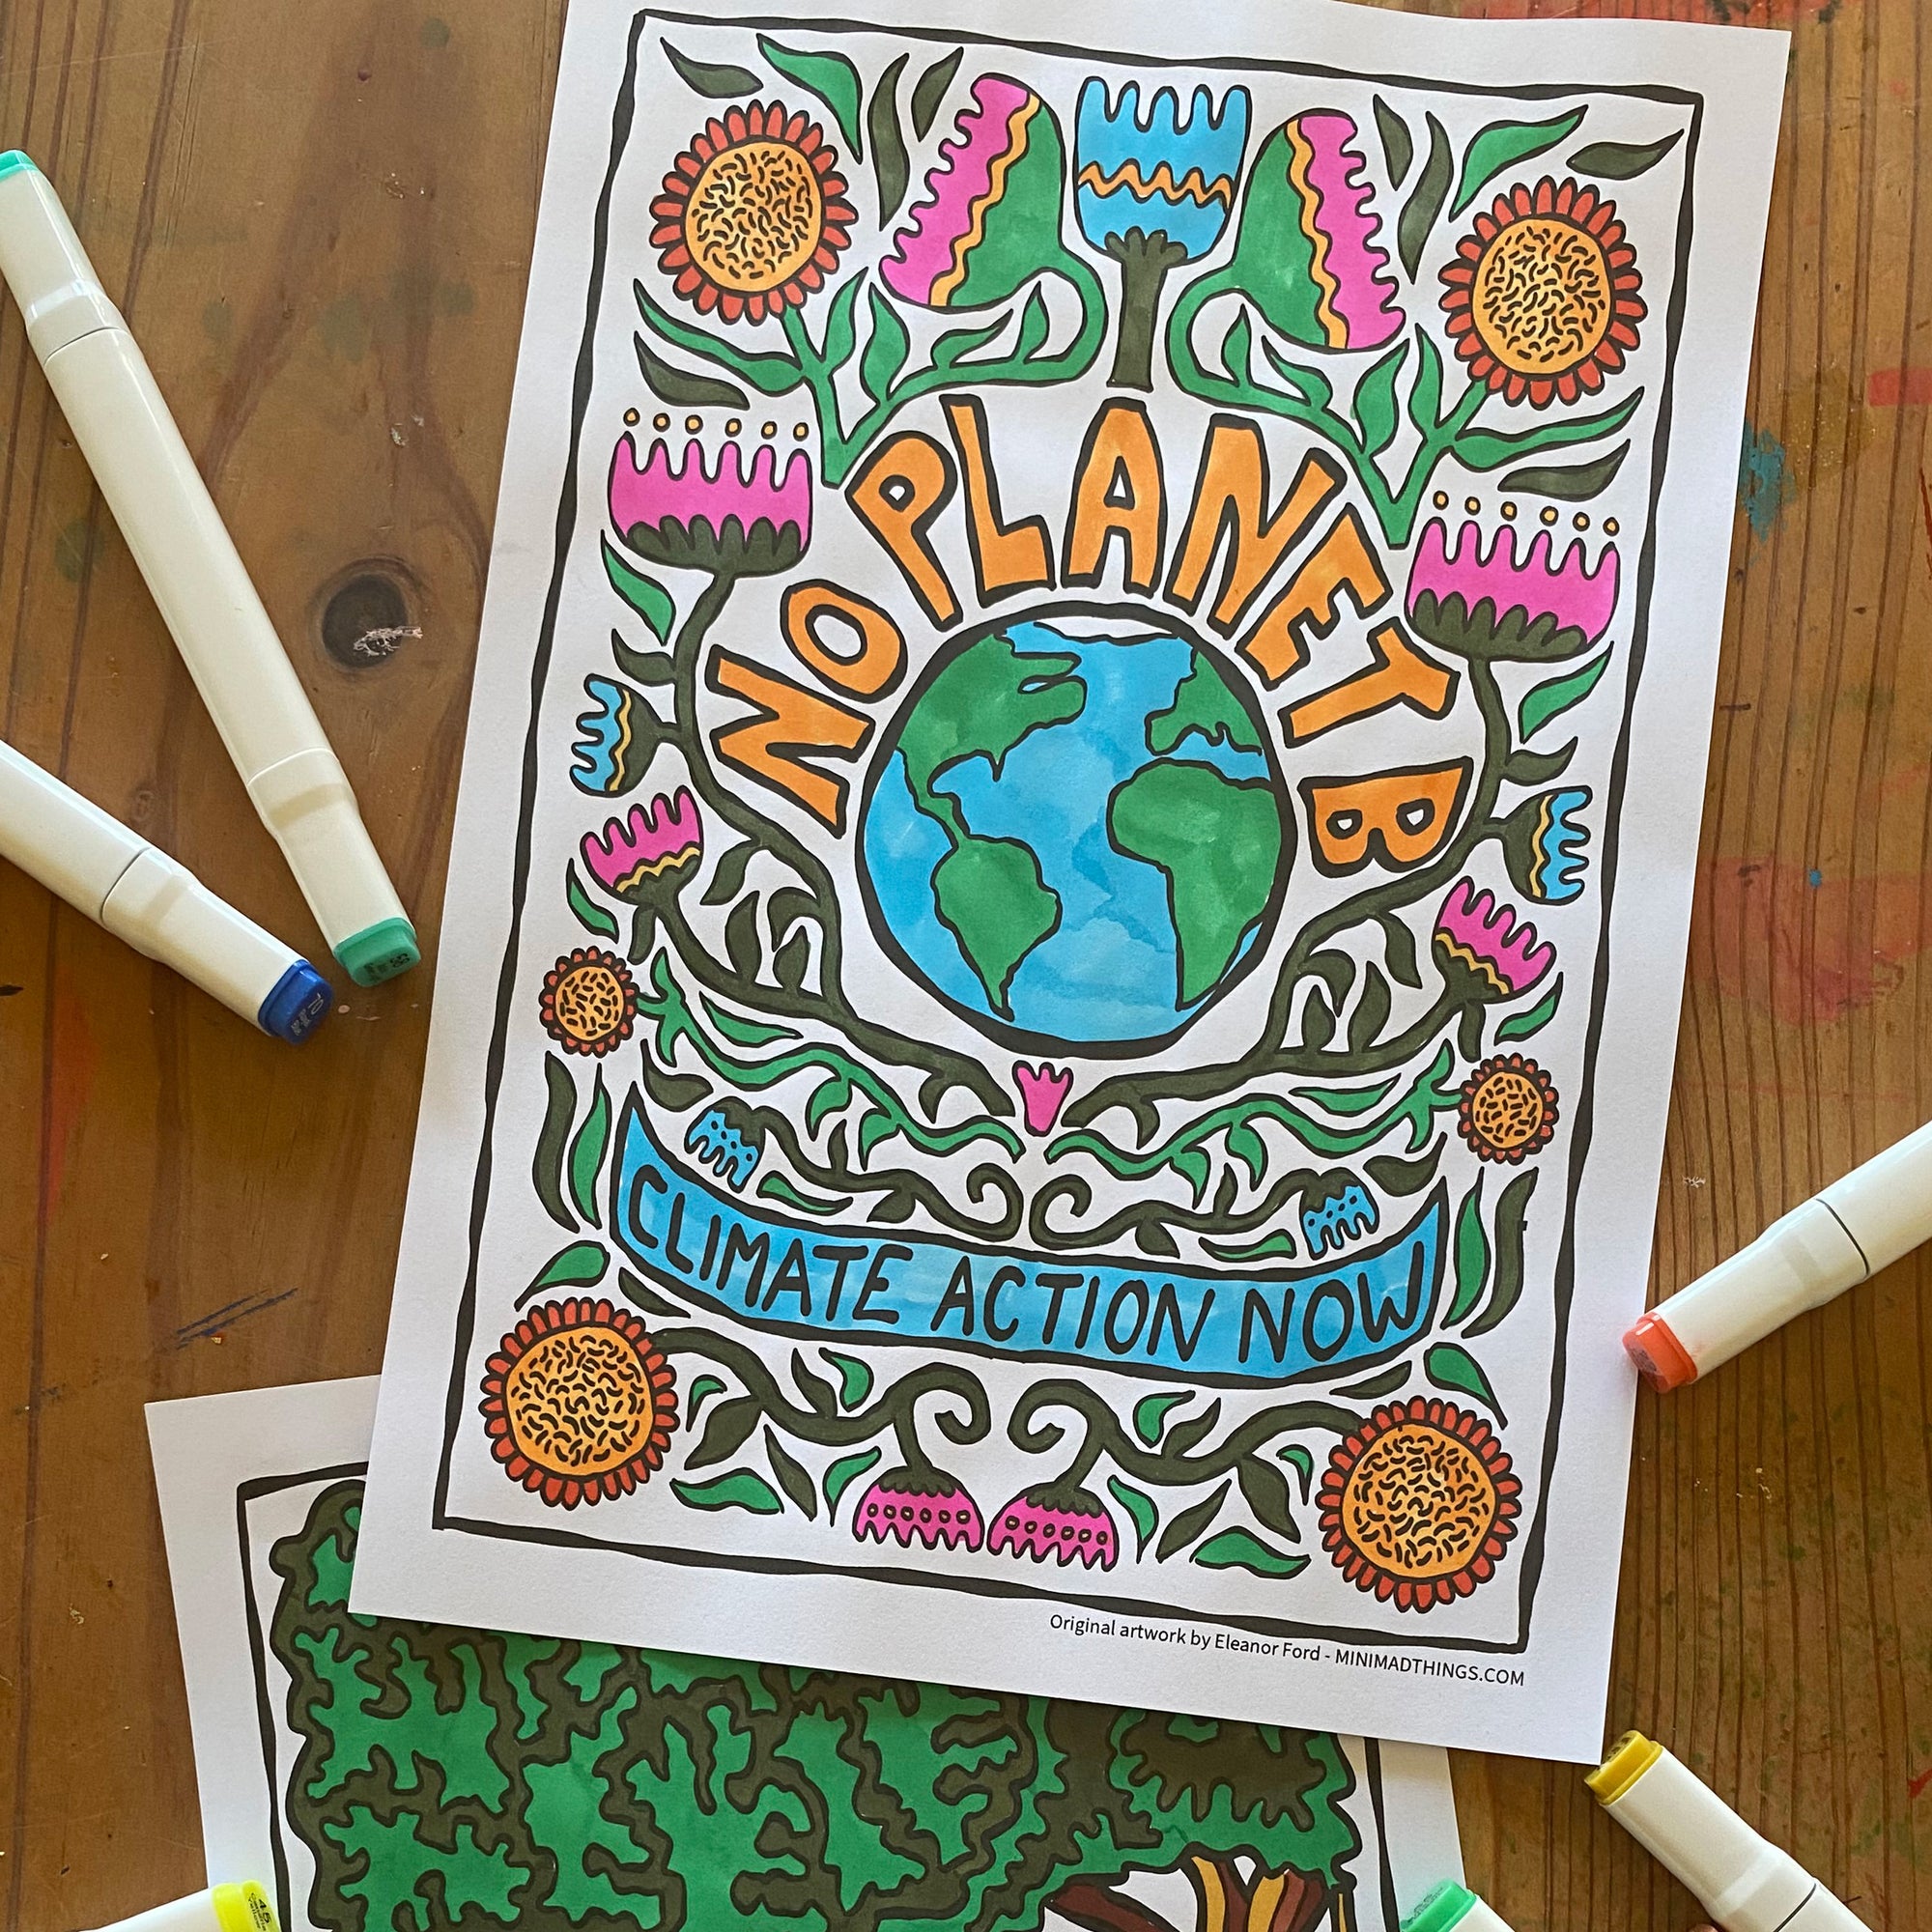 Climate action poster - Colouring in sheets